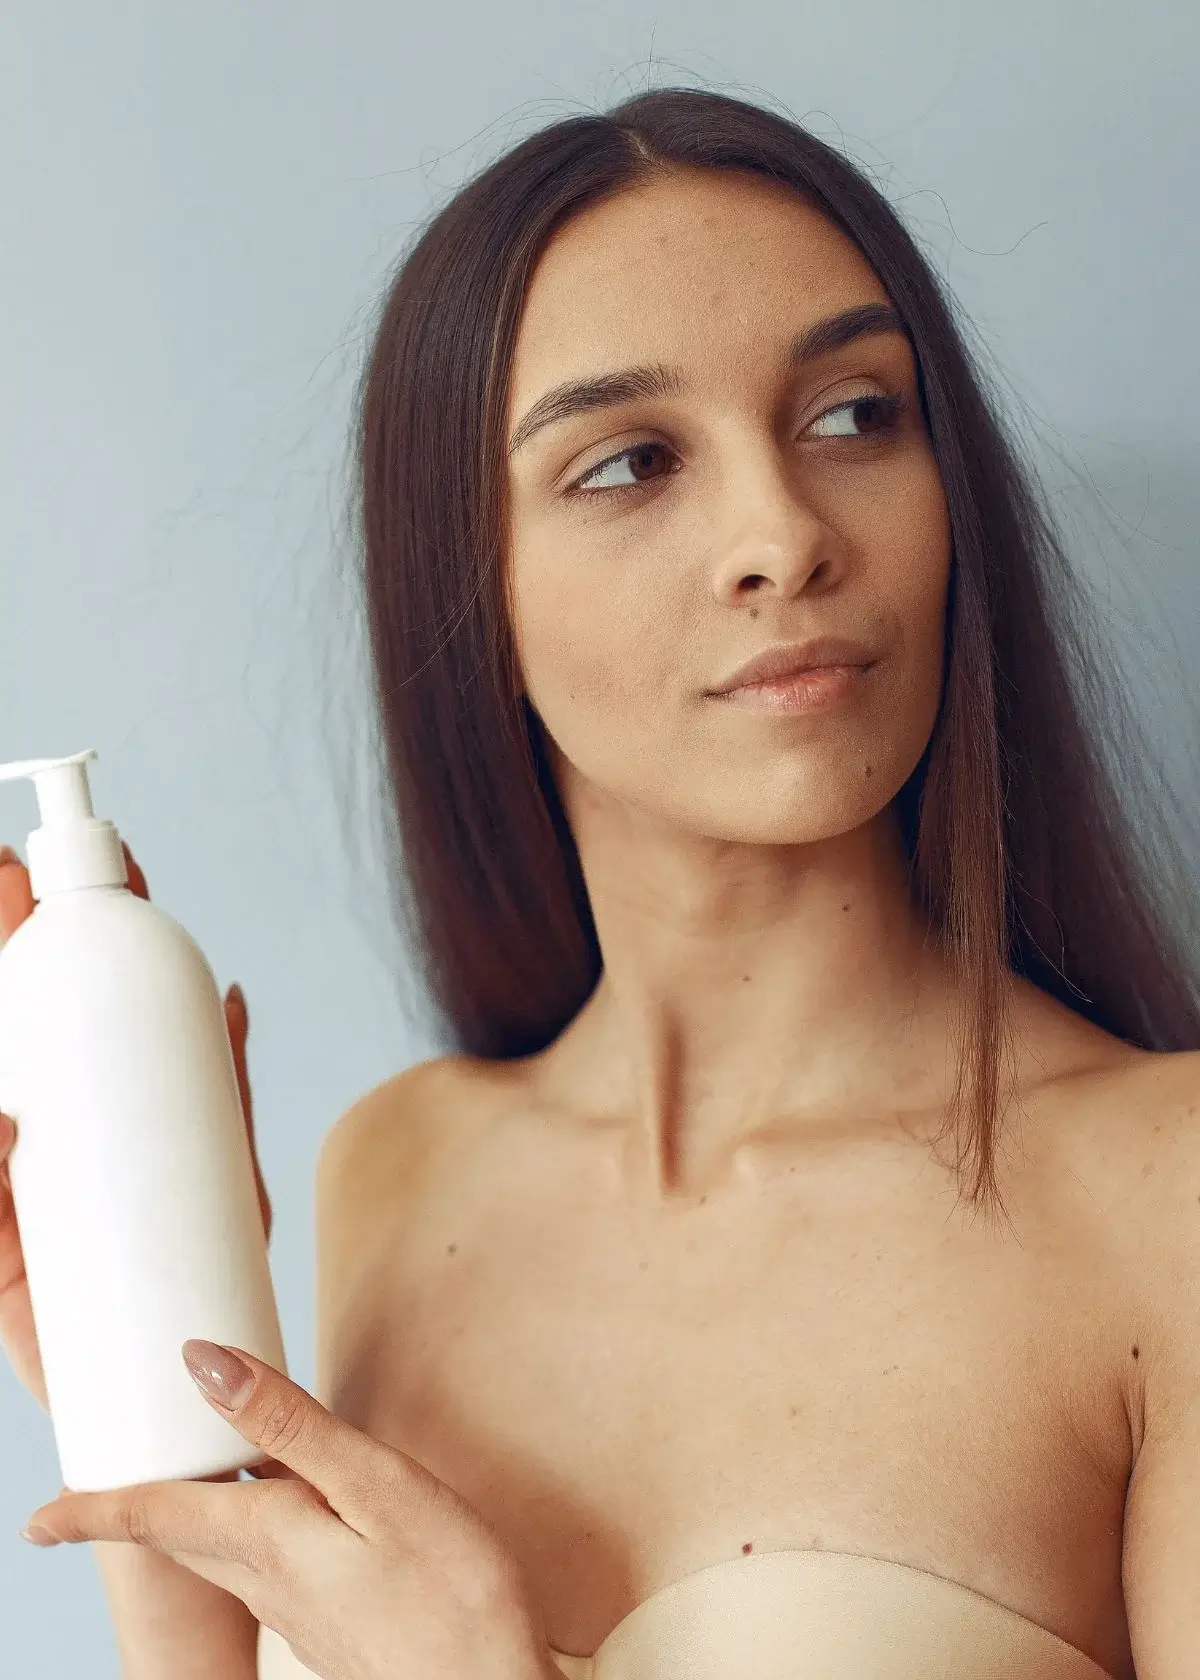 How to choose the right sulfate-free shampoo?